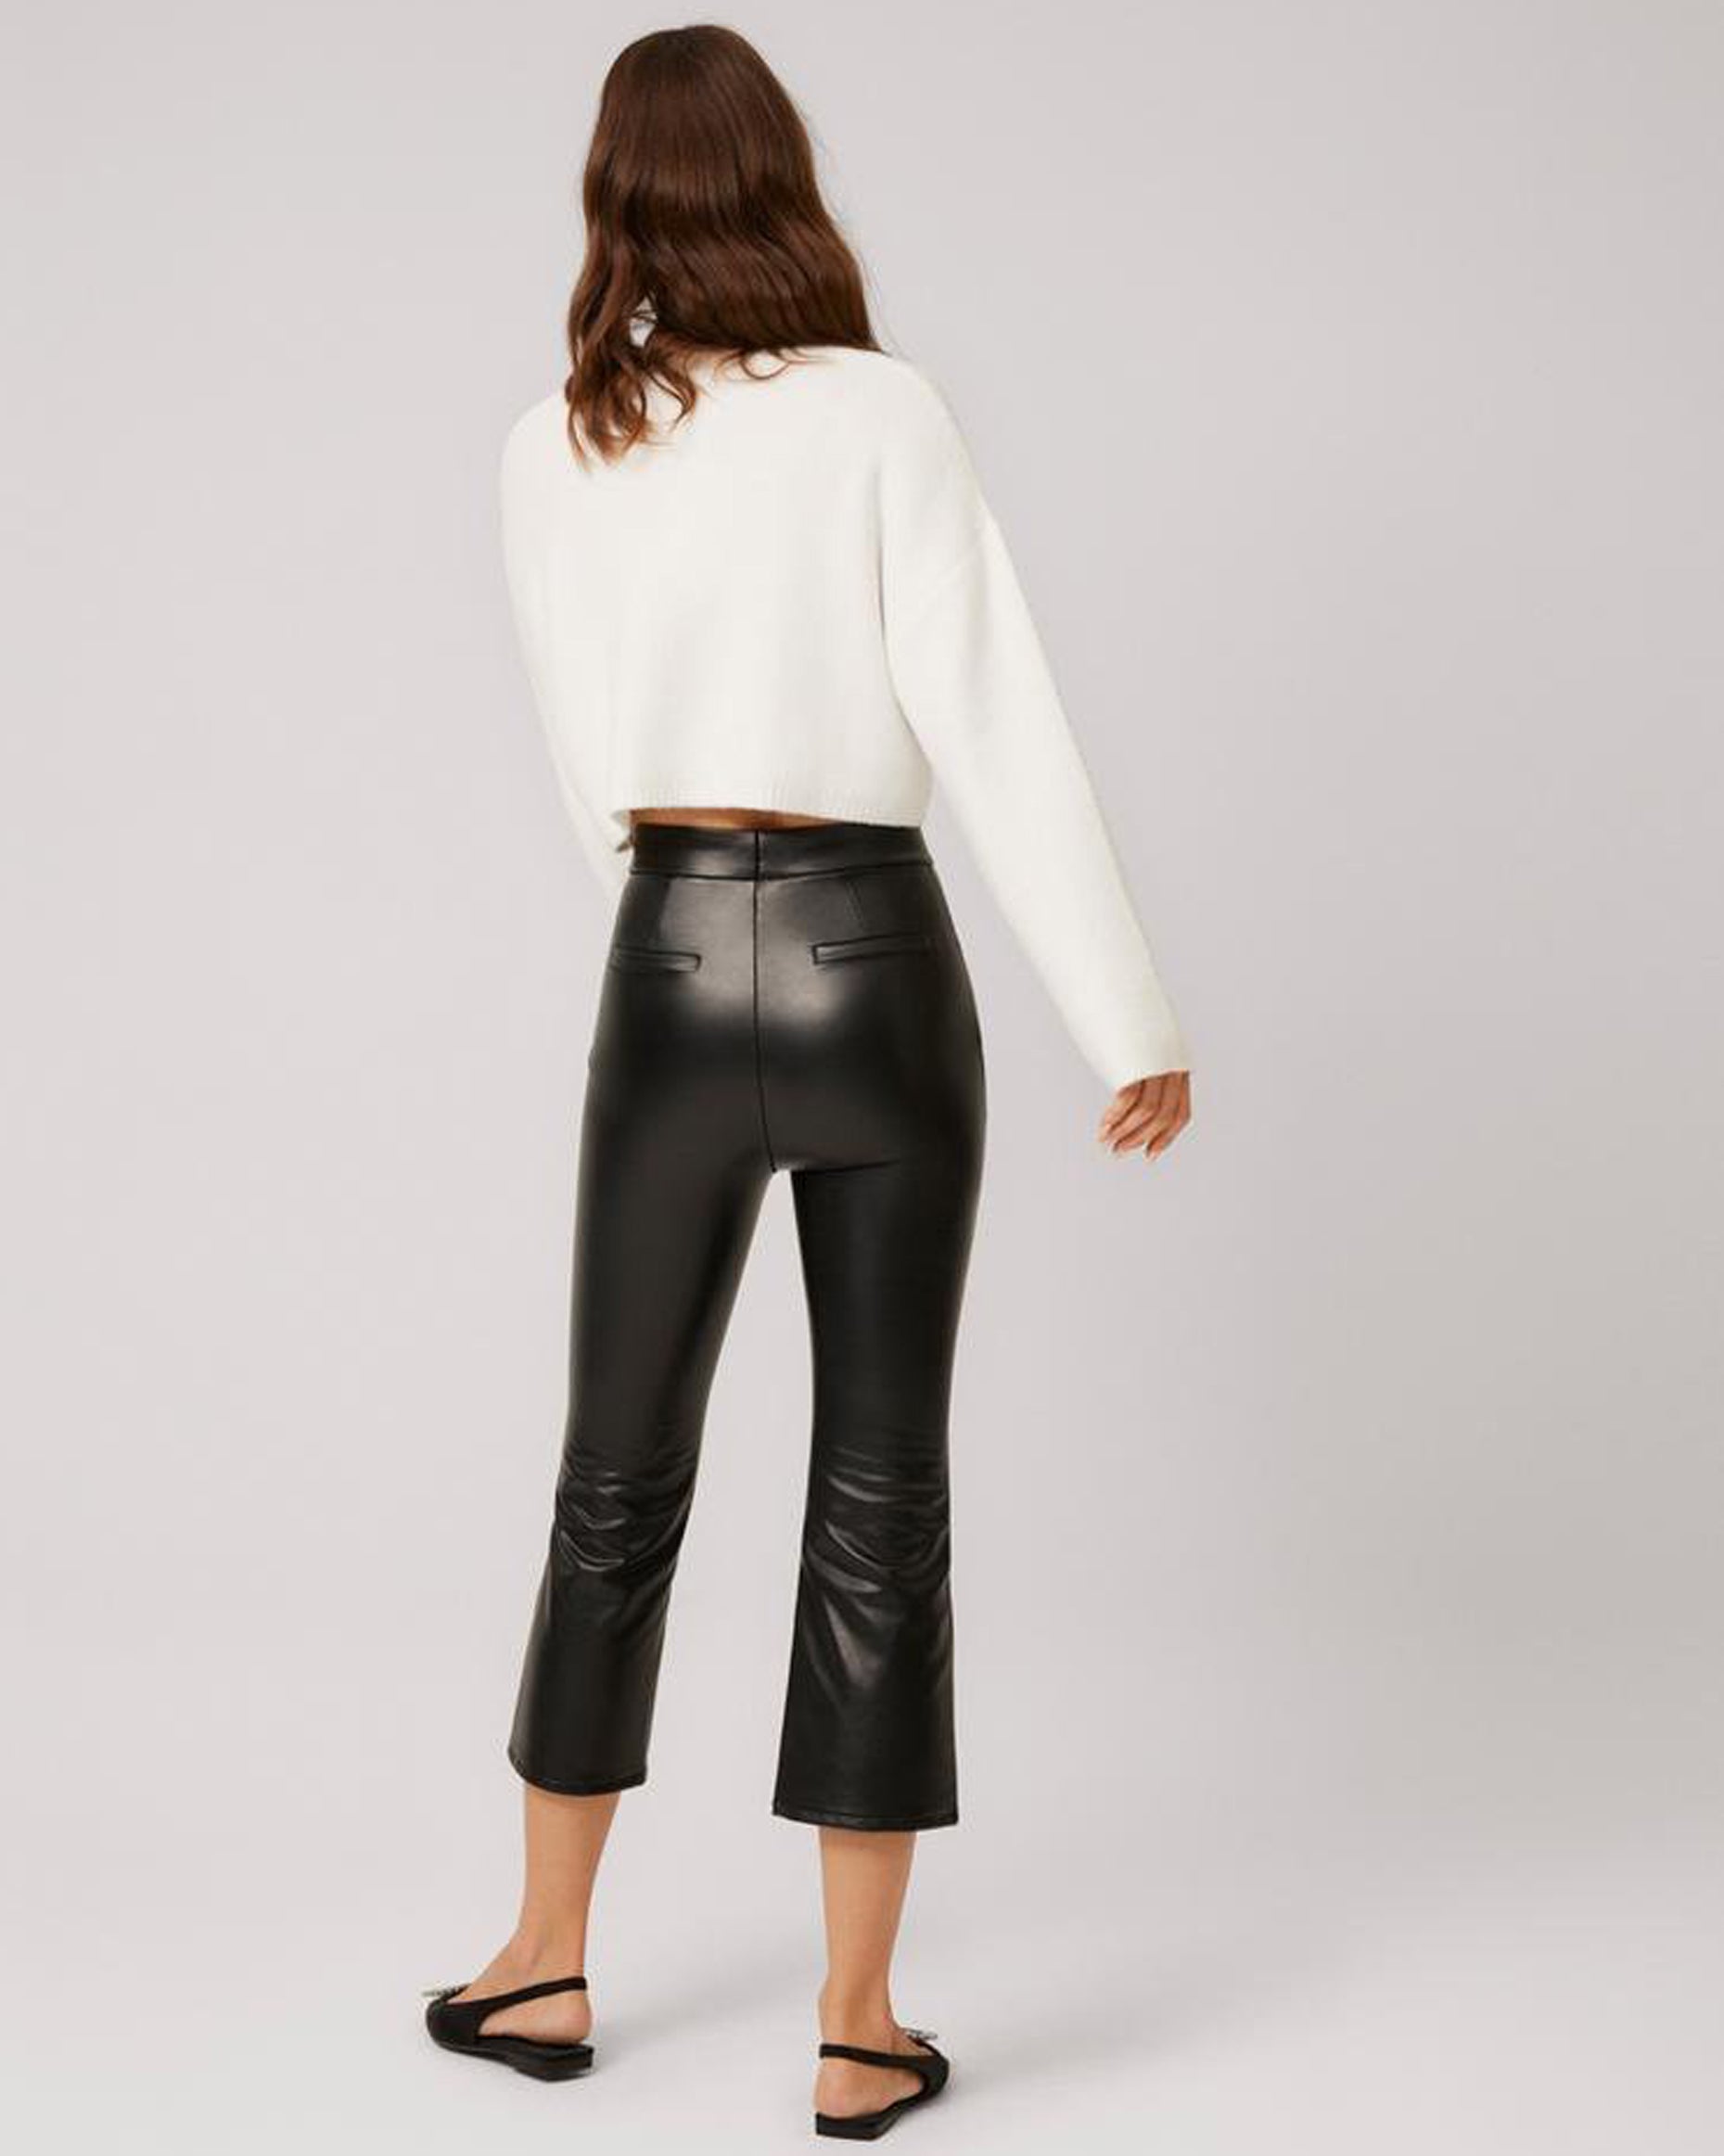 Ysabel Mora 70296 Faux Leather Cropped Pants - Black flared crop faux leather thermal leggings with a soft and warm plush lining. Worn with an off white knitted sweater and sling back pointed shoes..